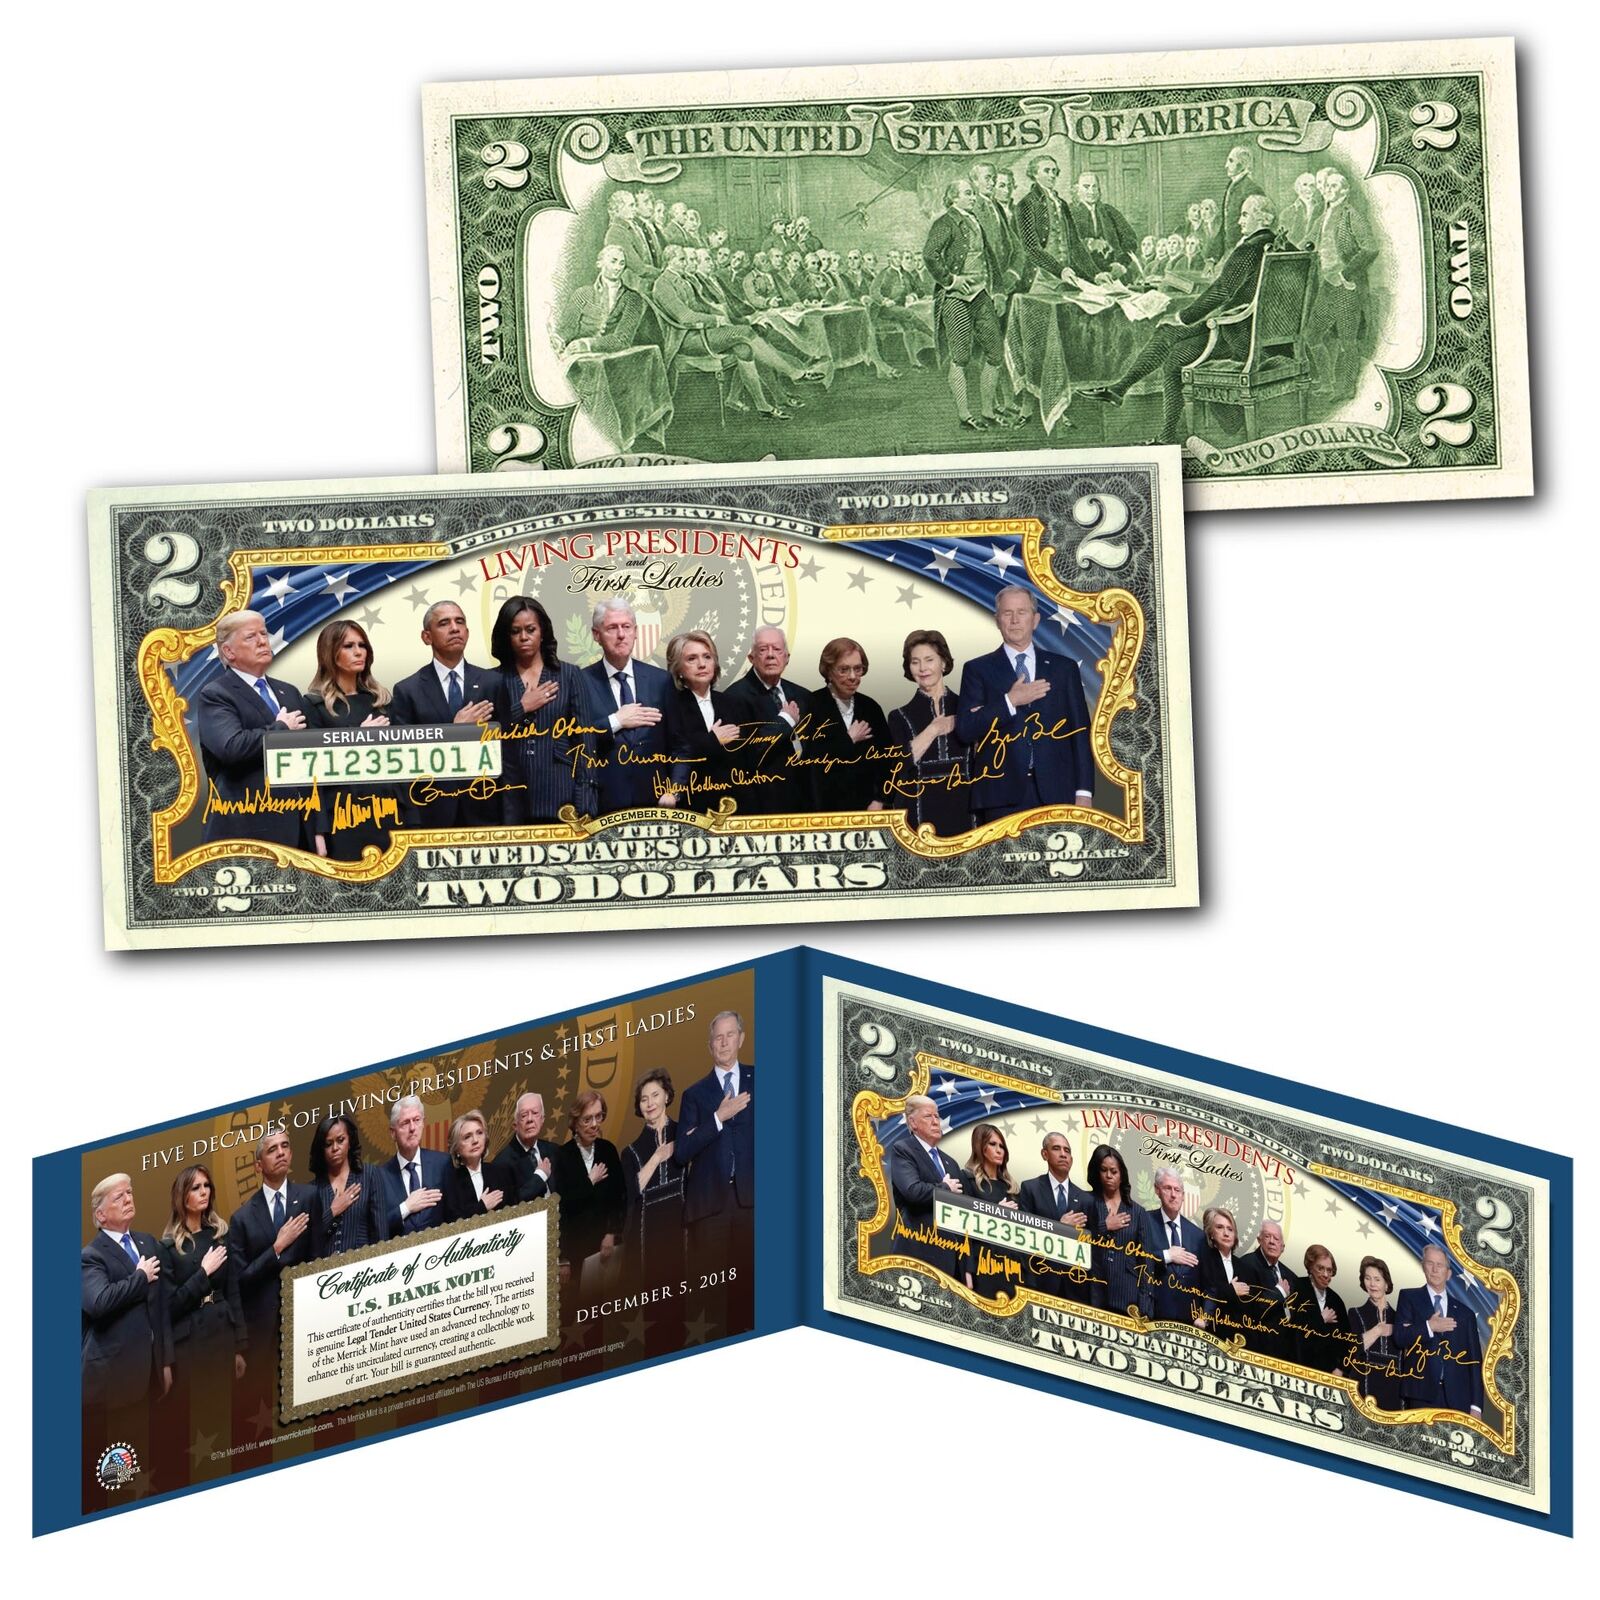 2019 LIVING PRESIDENTS with FIRST LADIES Historical Official Genuine US $2 Bill